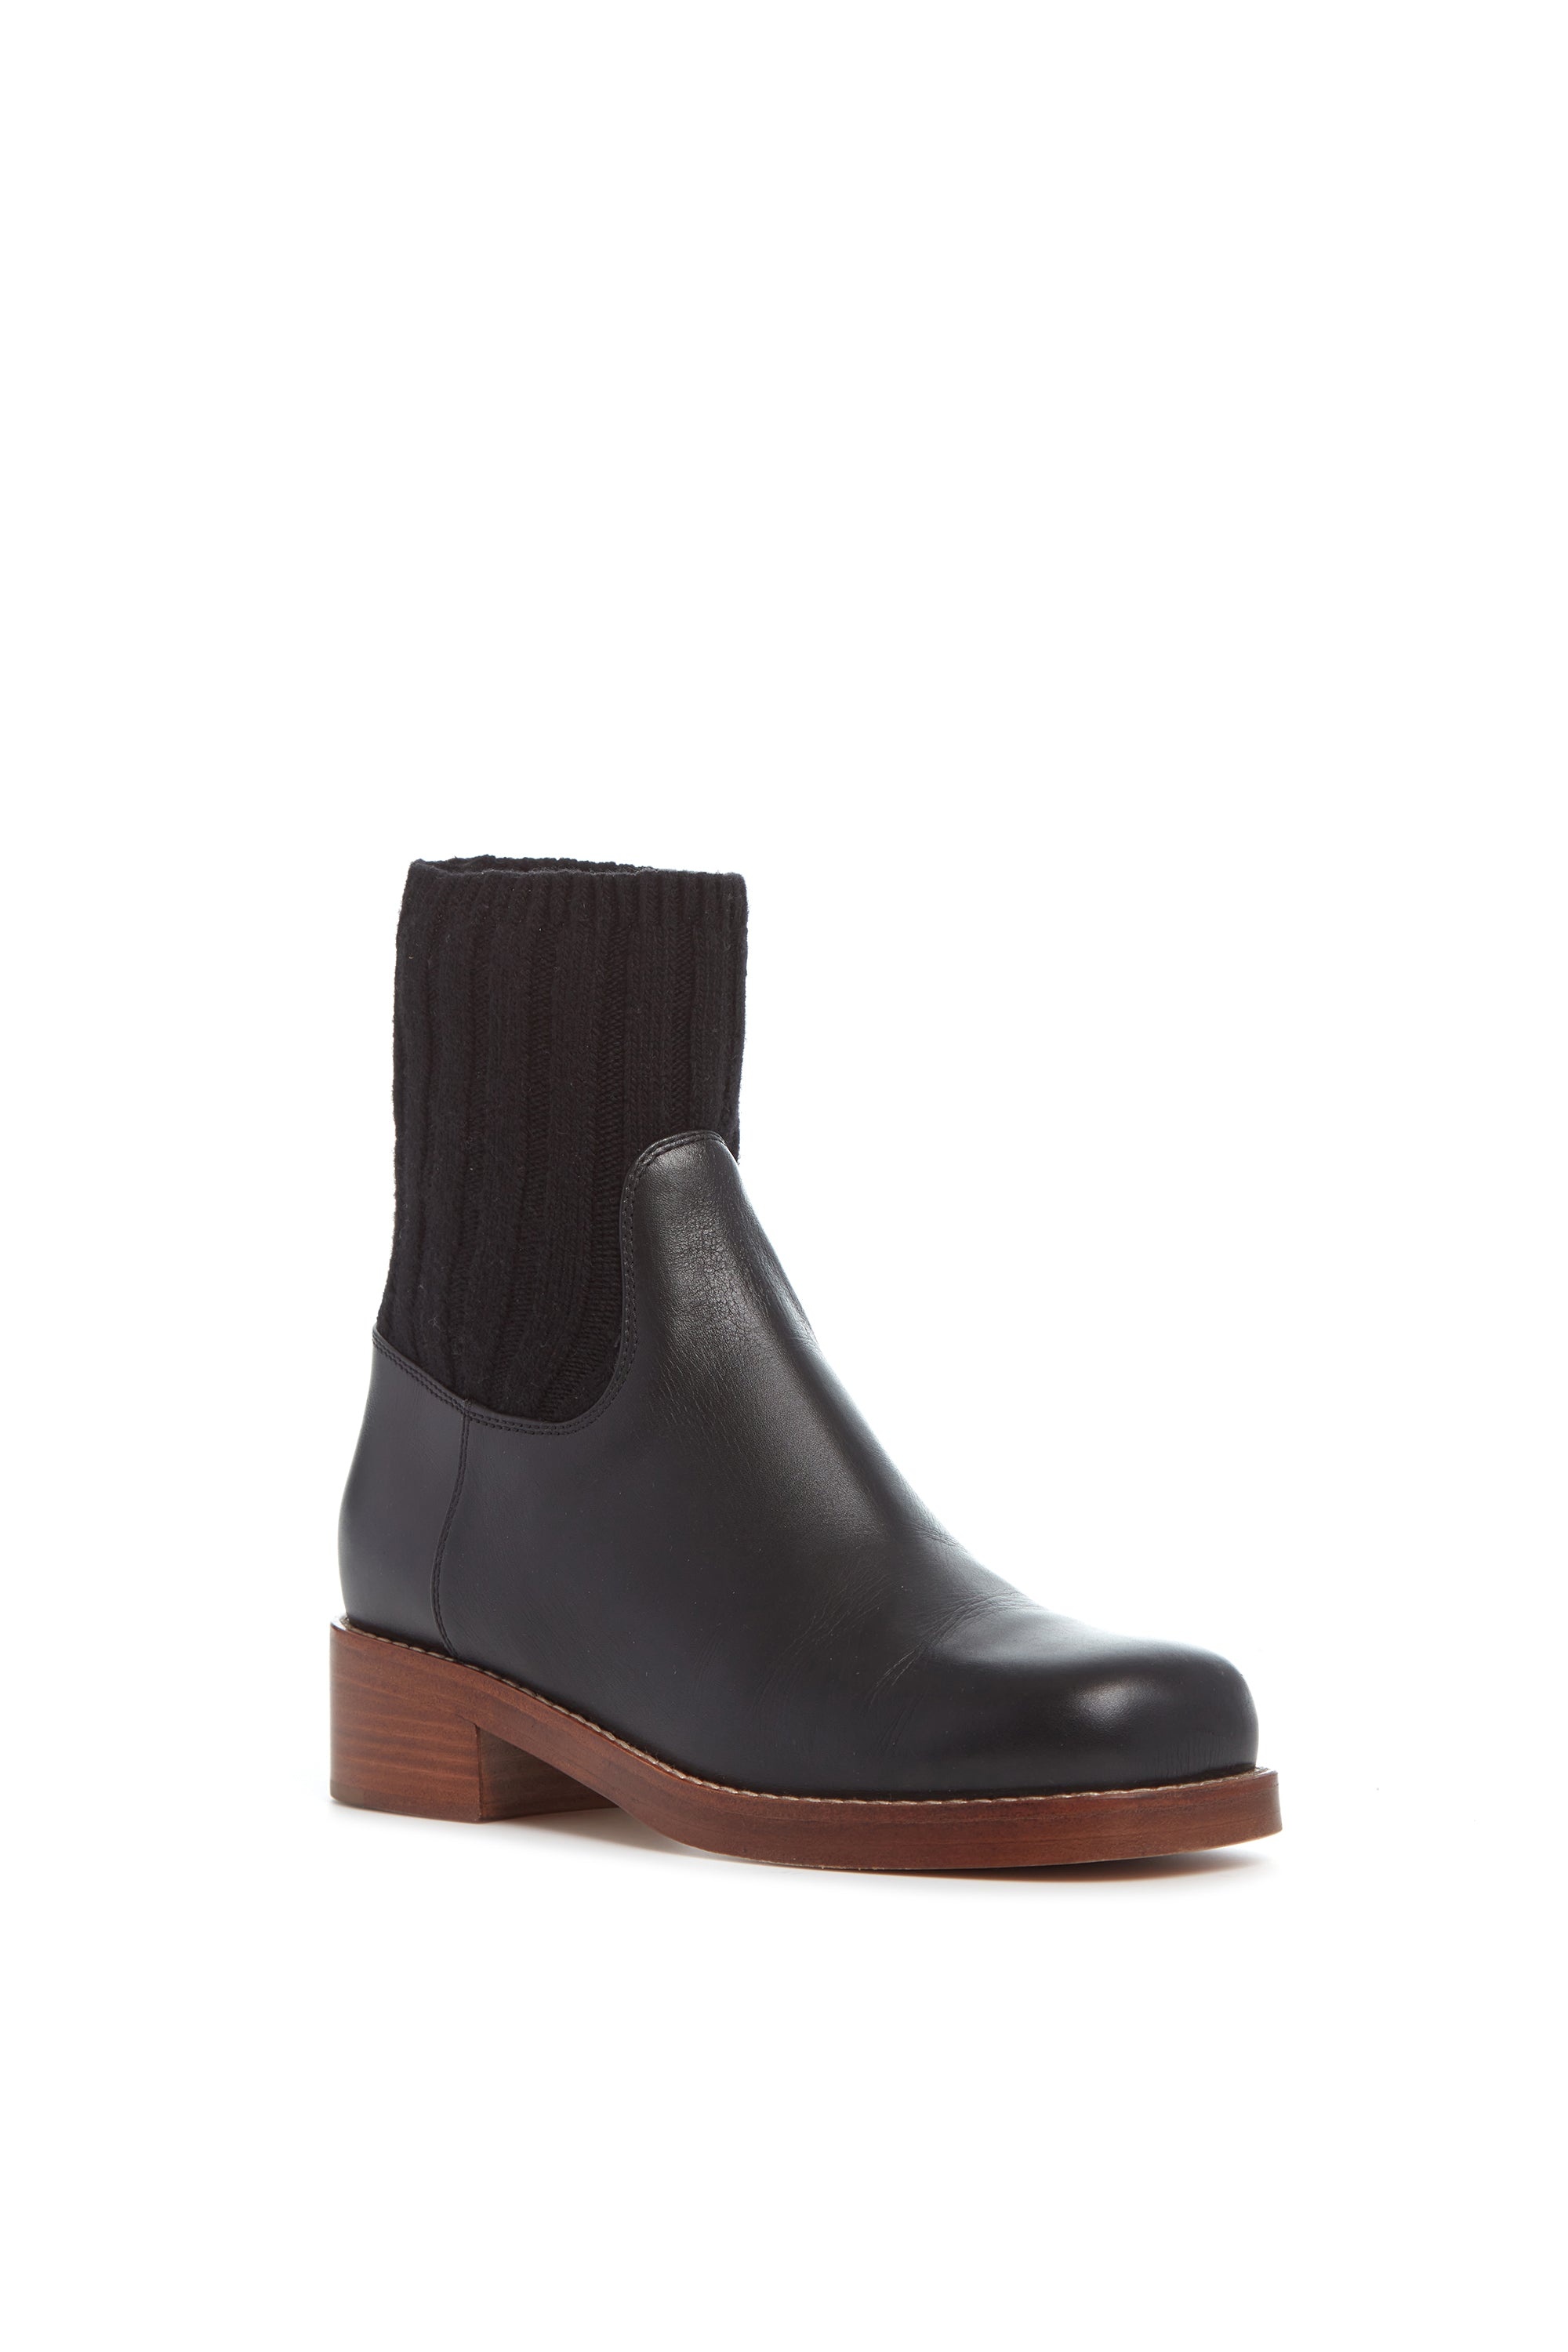 Hobbes Sock Boot in Black Leather & Cashmere - 2